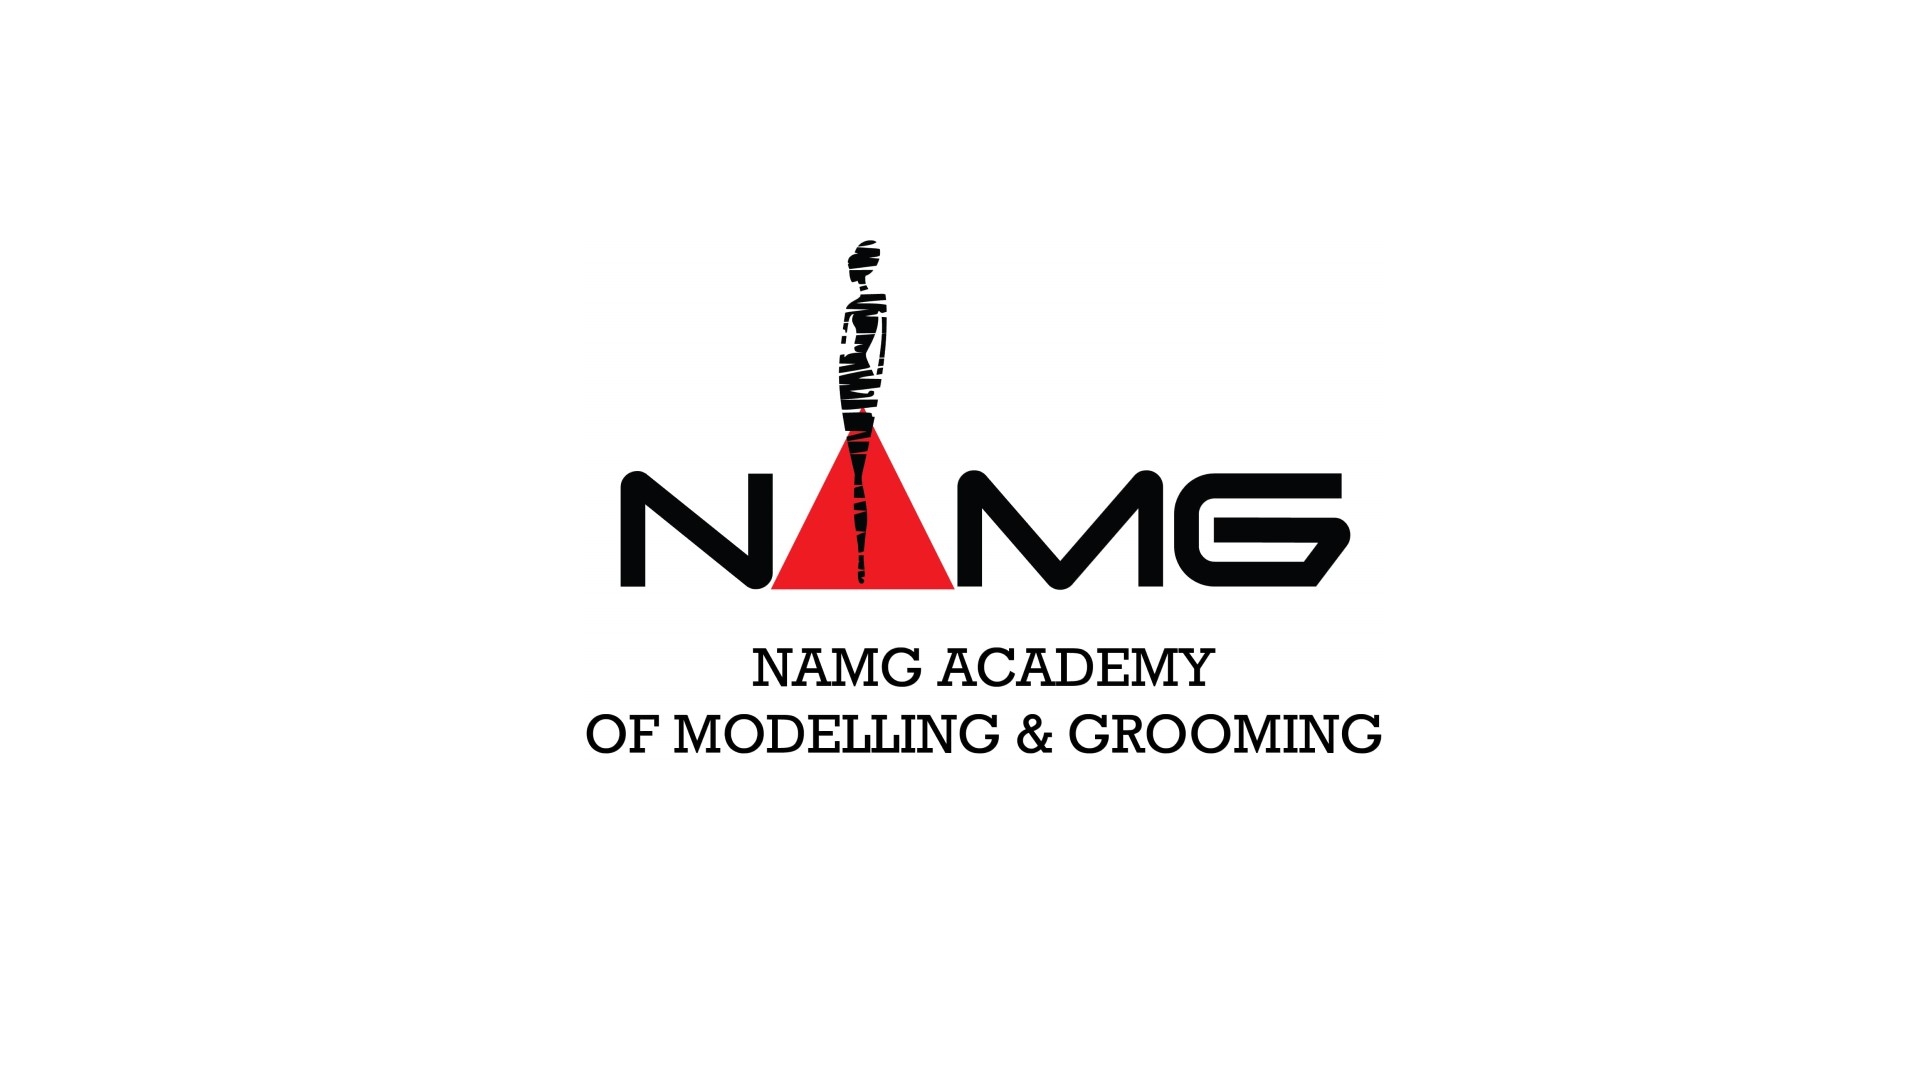 Dazzlerr - NAMG Academy of Modelling & Grooming 2